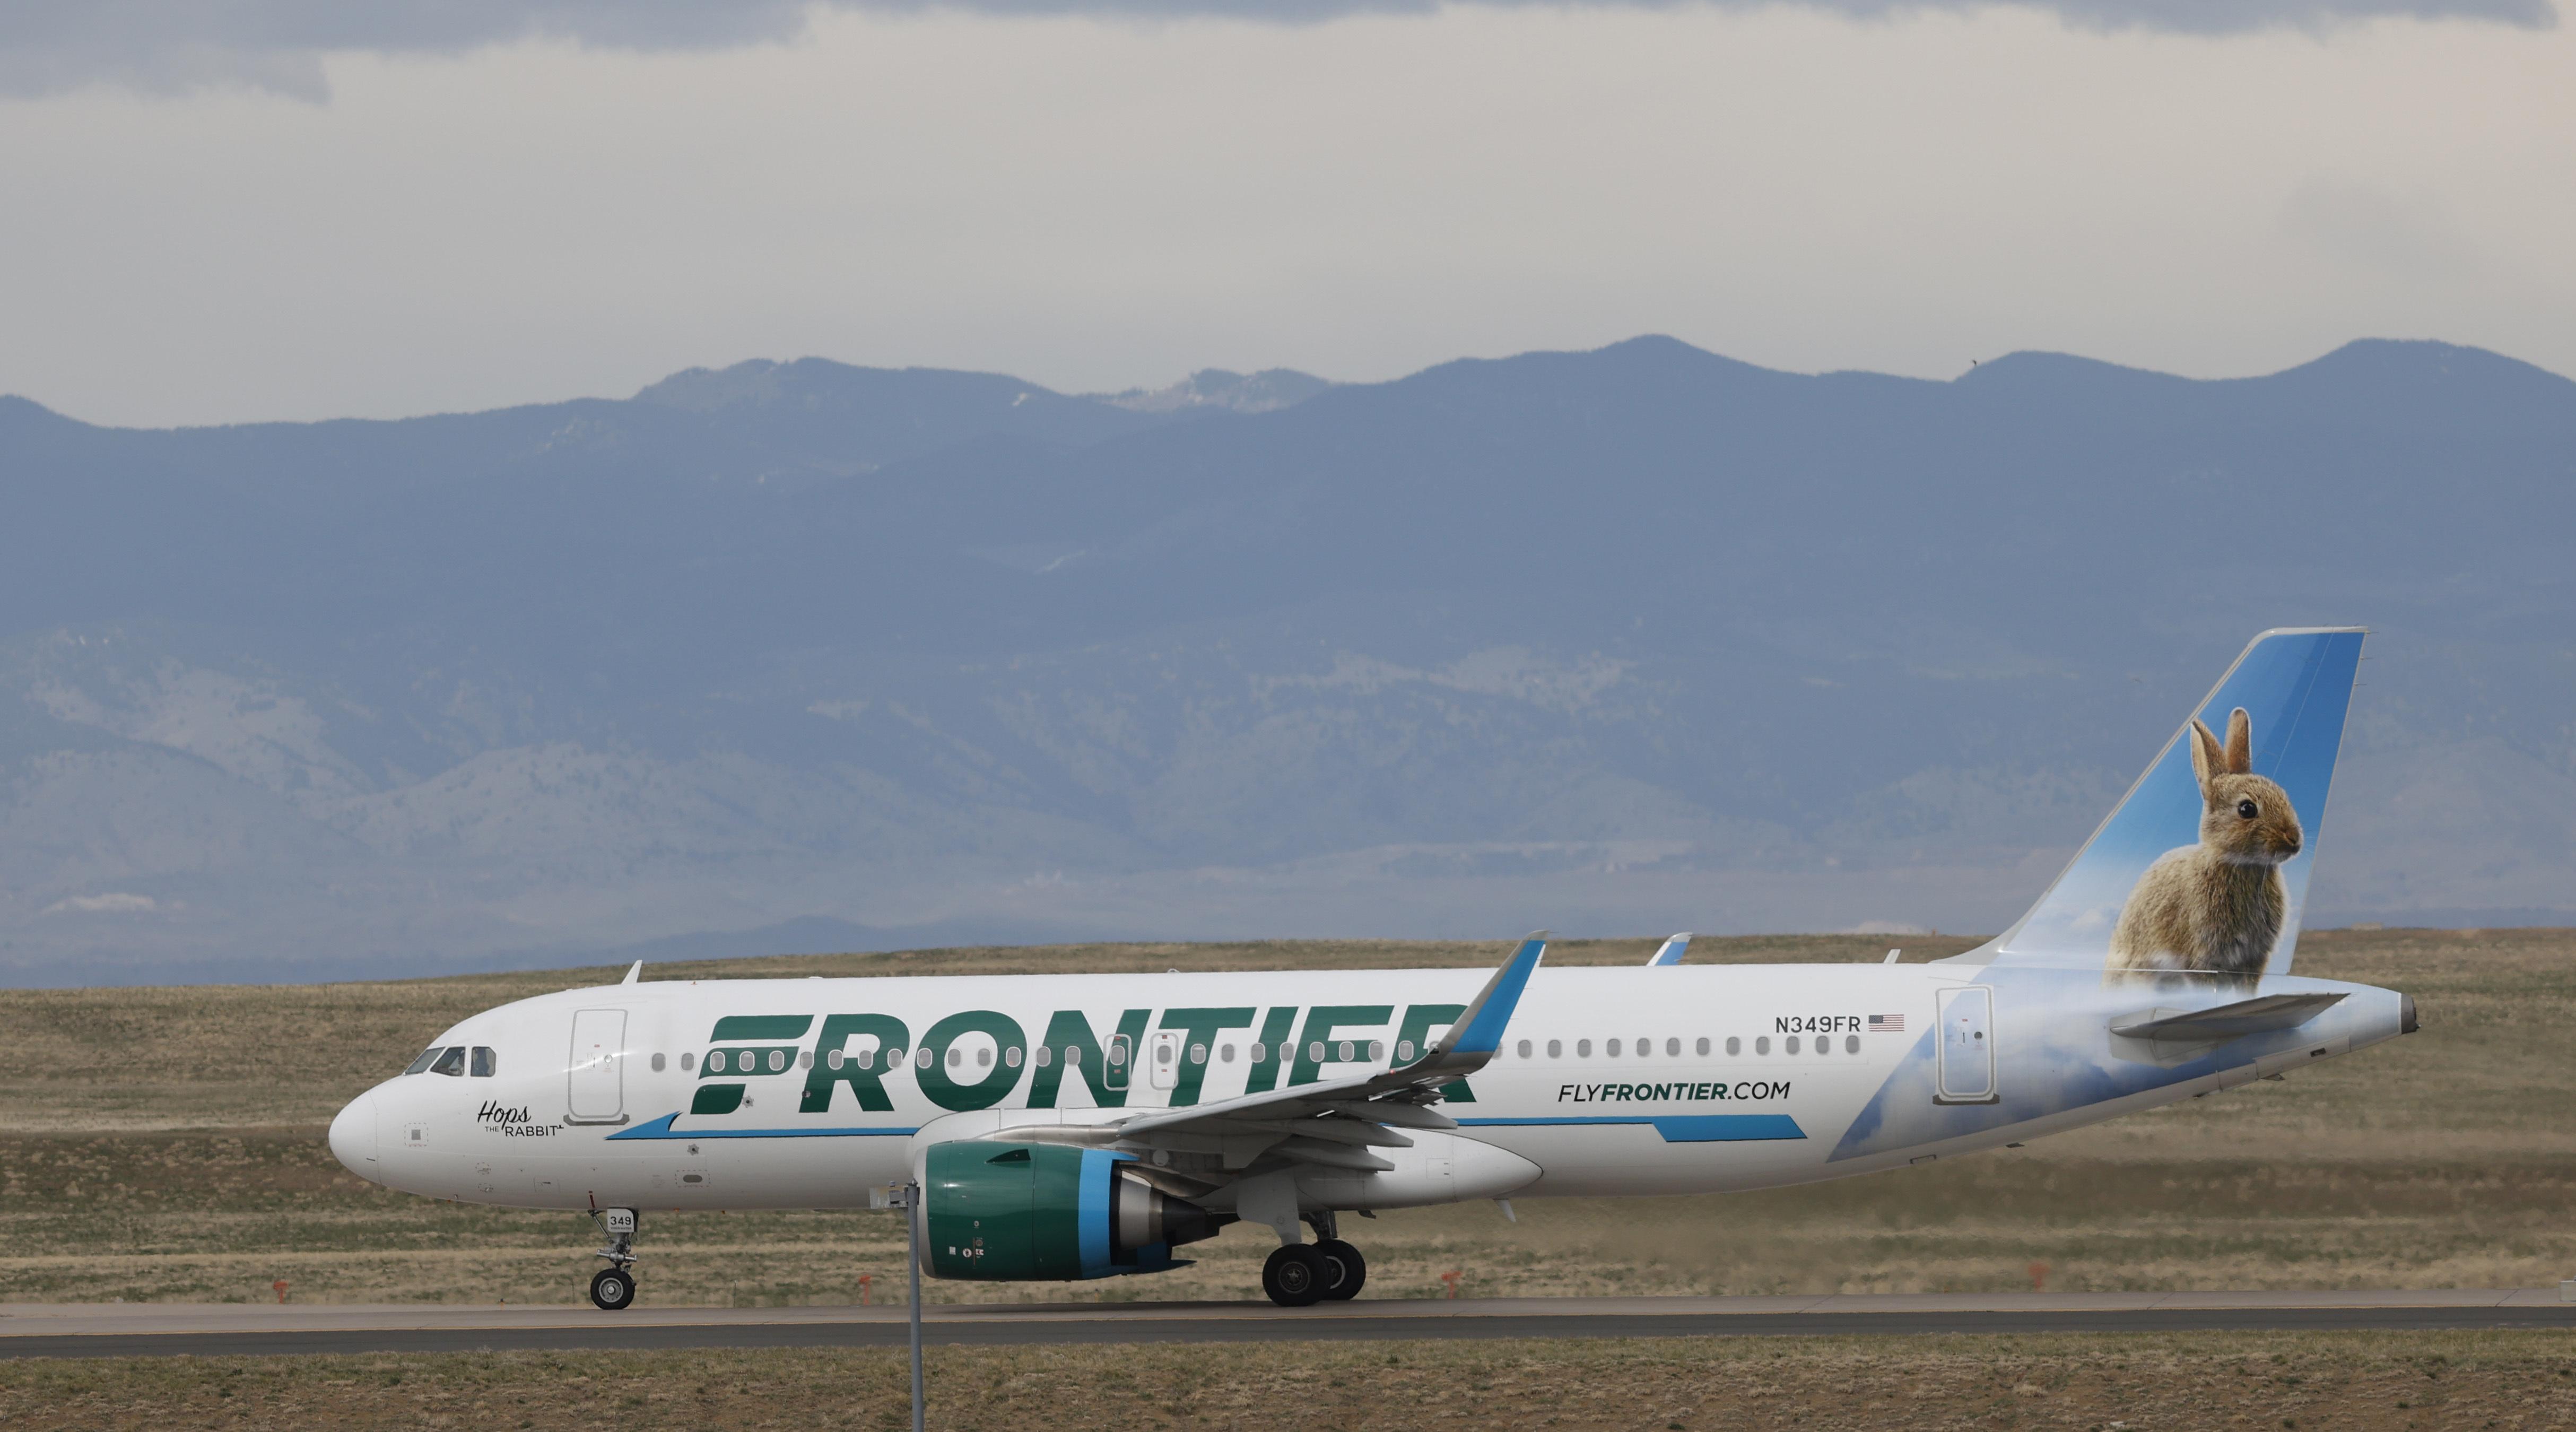 Frontier just became the first U.S. airline to require passenger